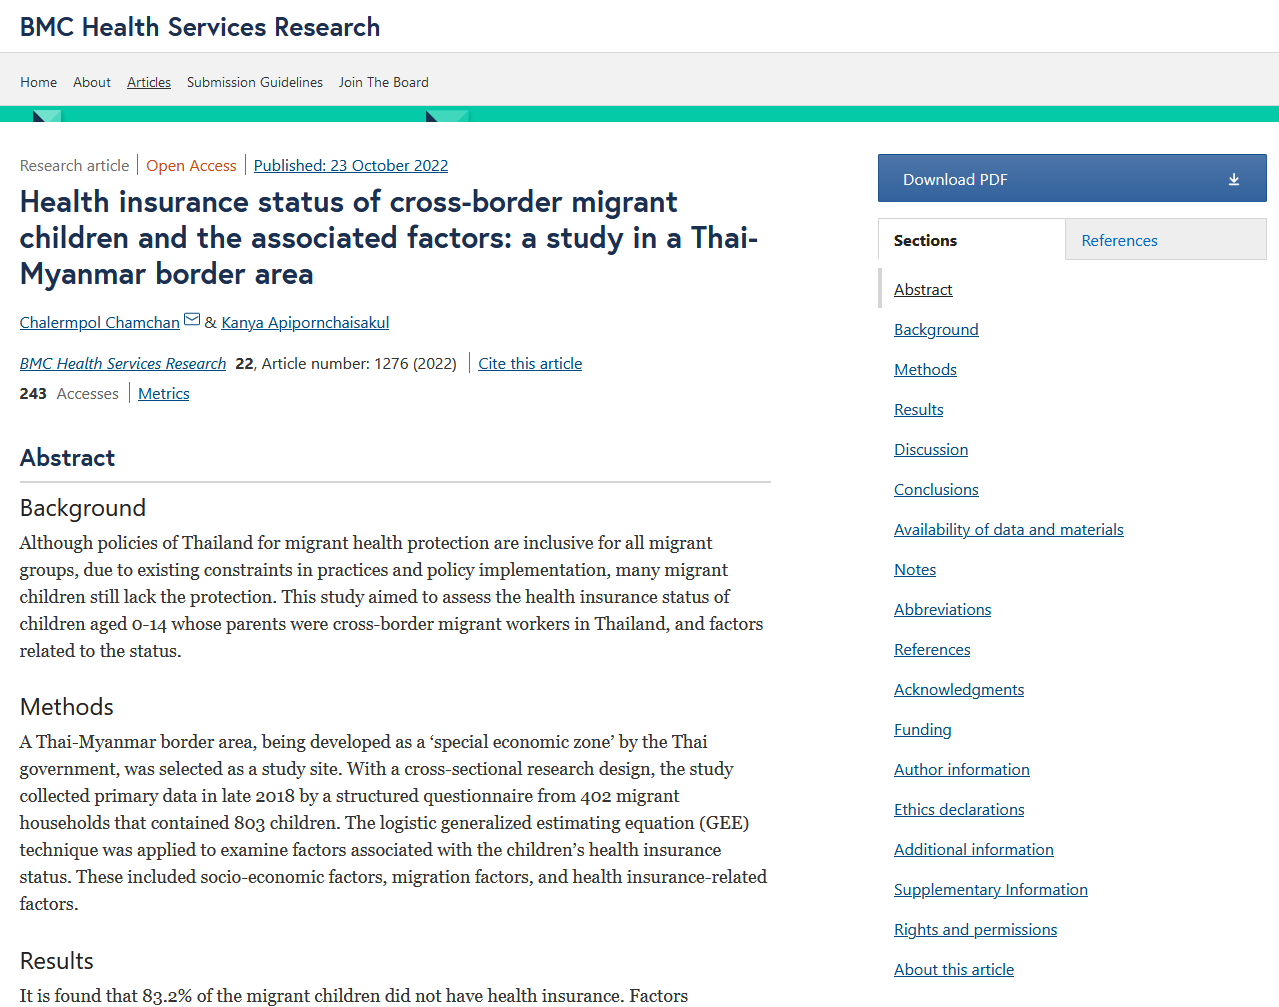 Health insurance status of cross-border migrant children and the associated factors: a study in a Thai-Myanmar border area